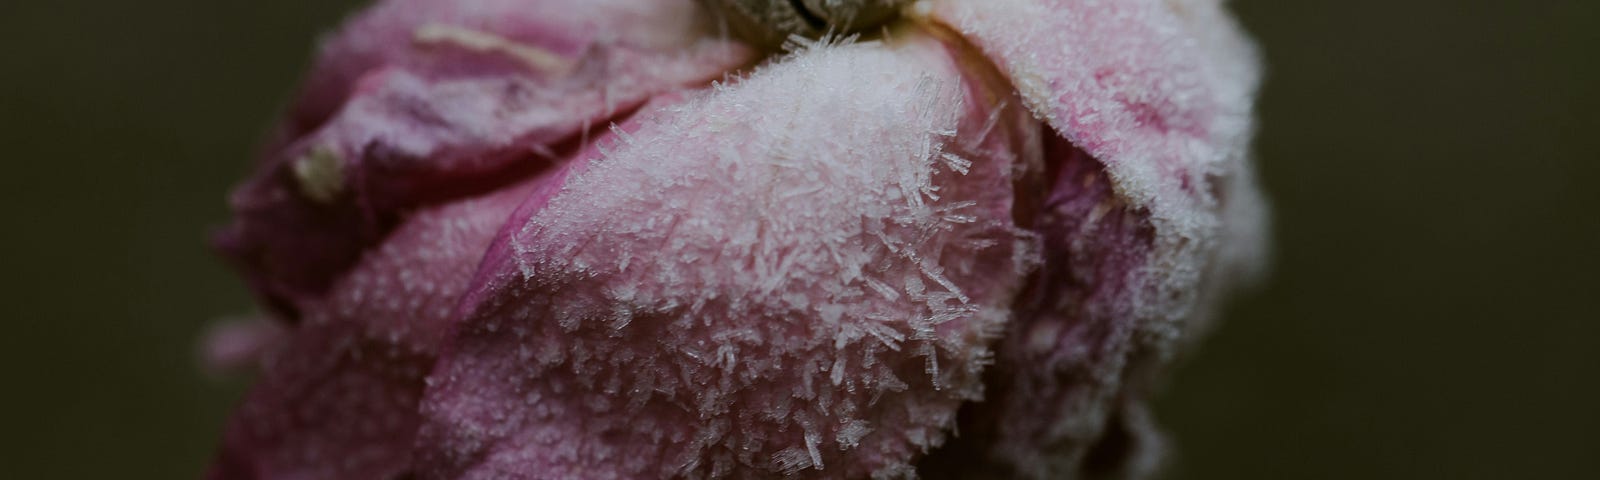 A dead frosted flower